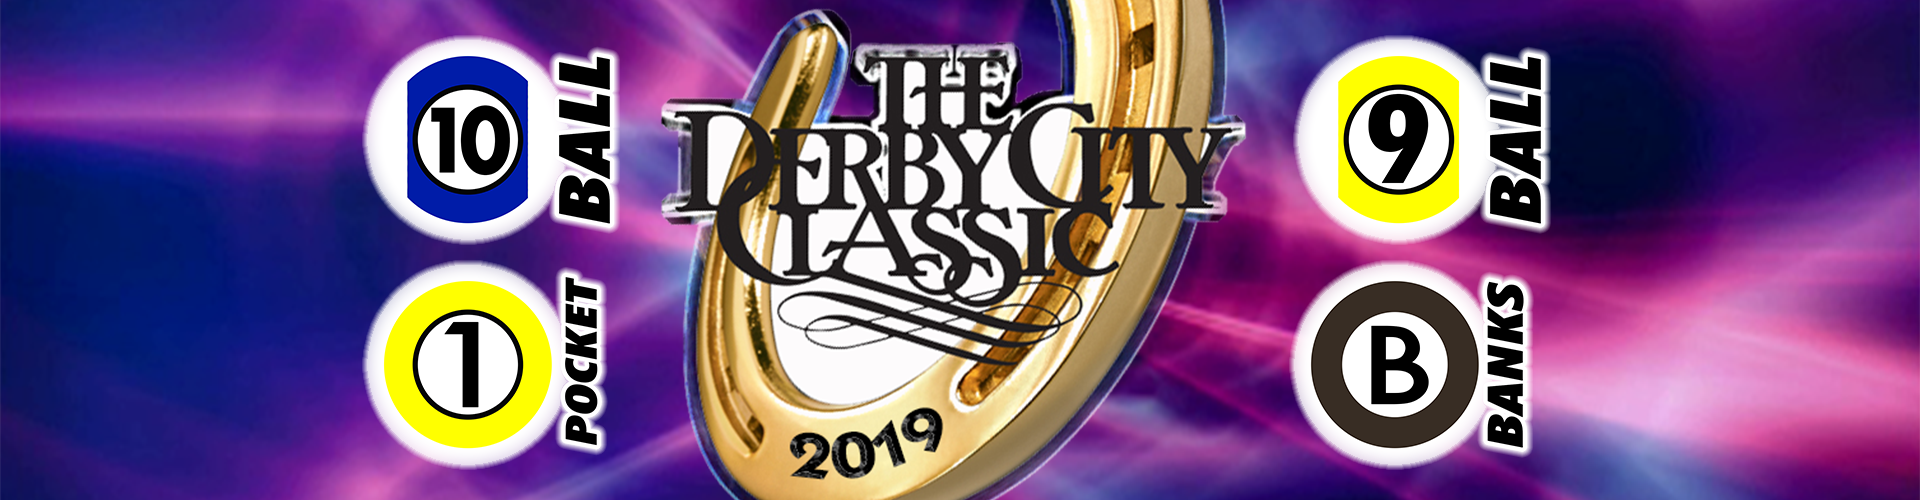 2019 DERBY CITY CLASSIC